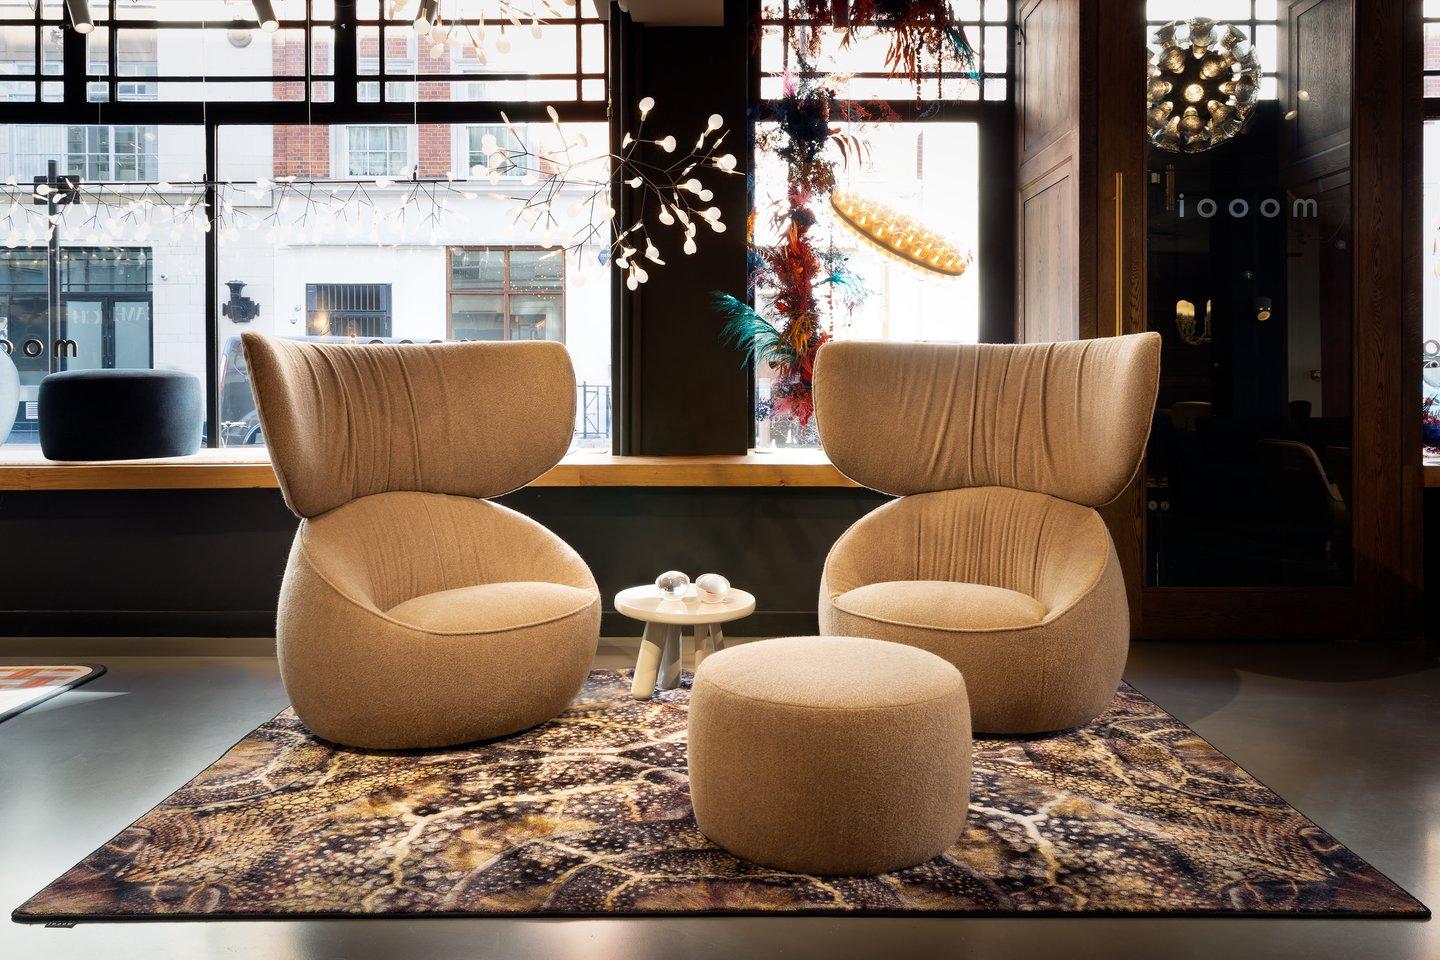 Moooi Pooof Large Pouf in Liscio, Nebbia Light Grey Upholstery In New Condition For Sale In Brooklyn, NY